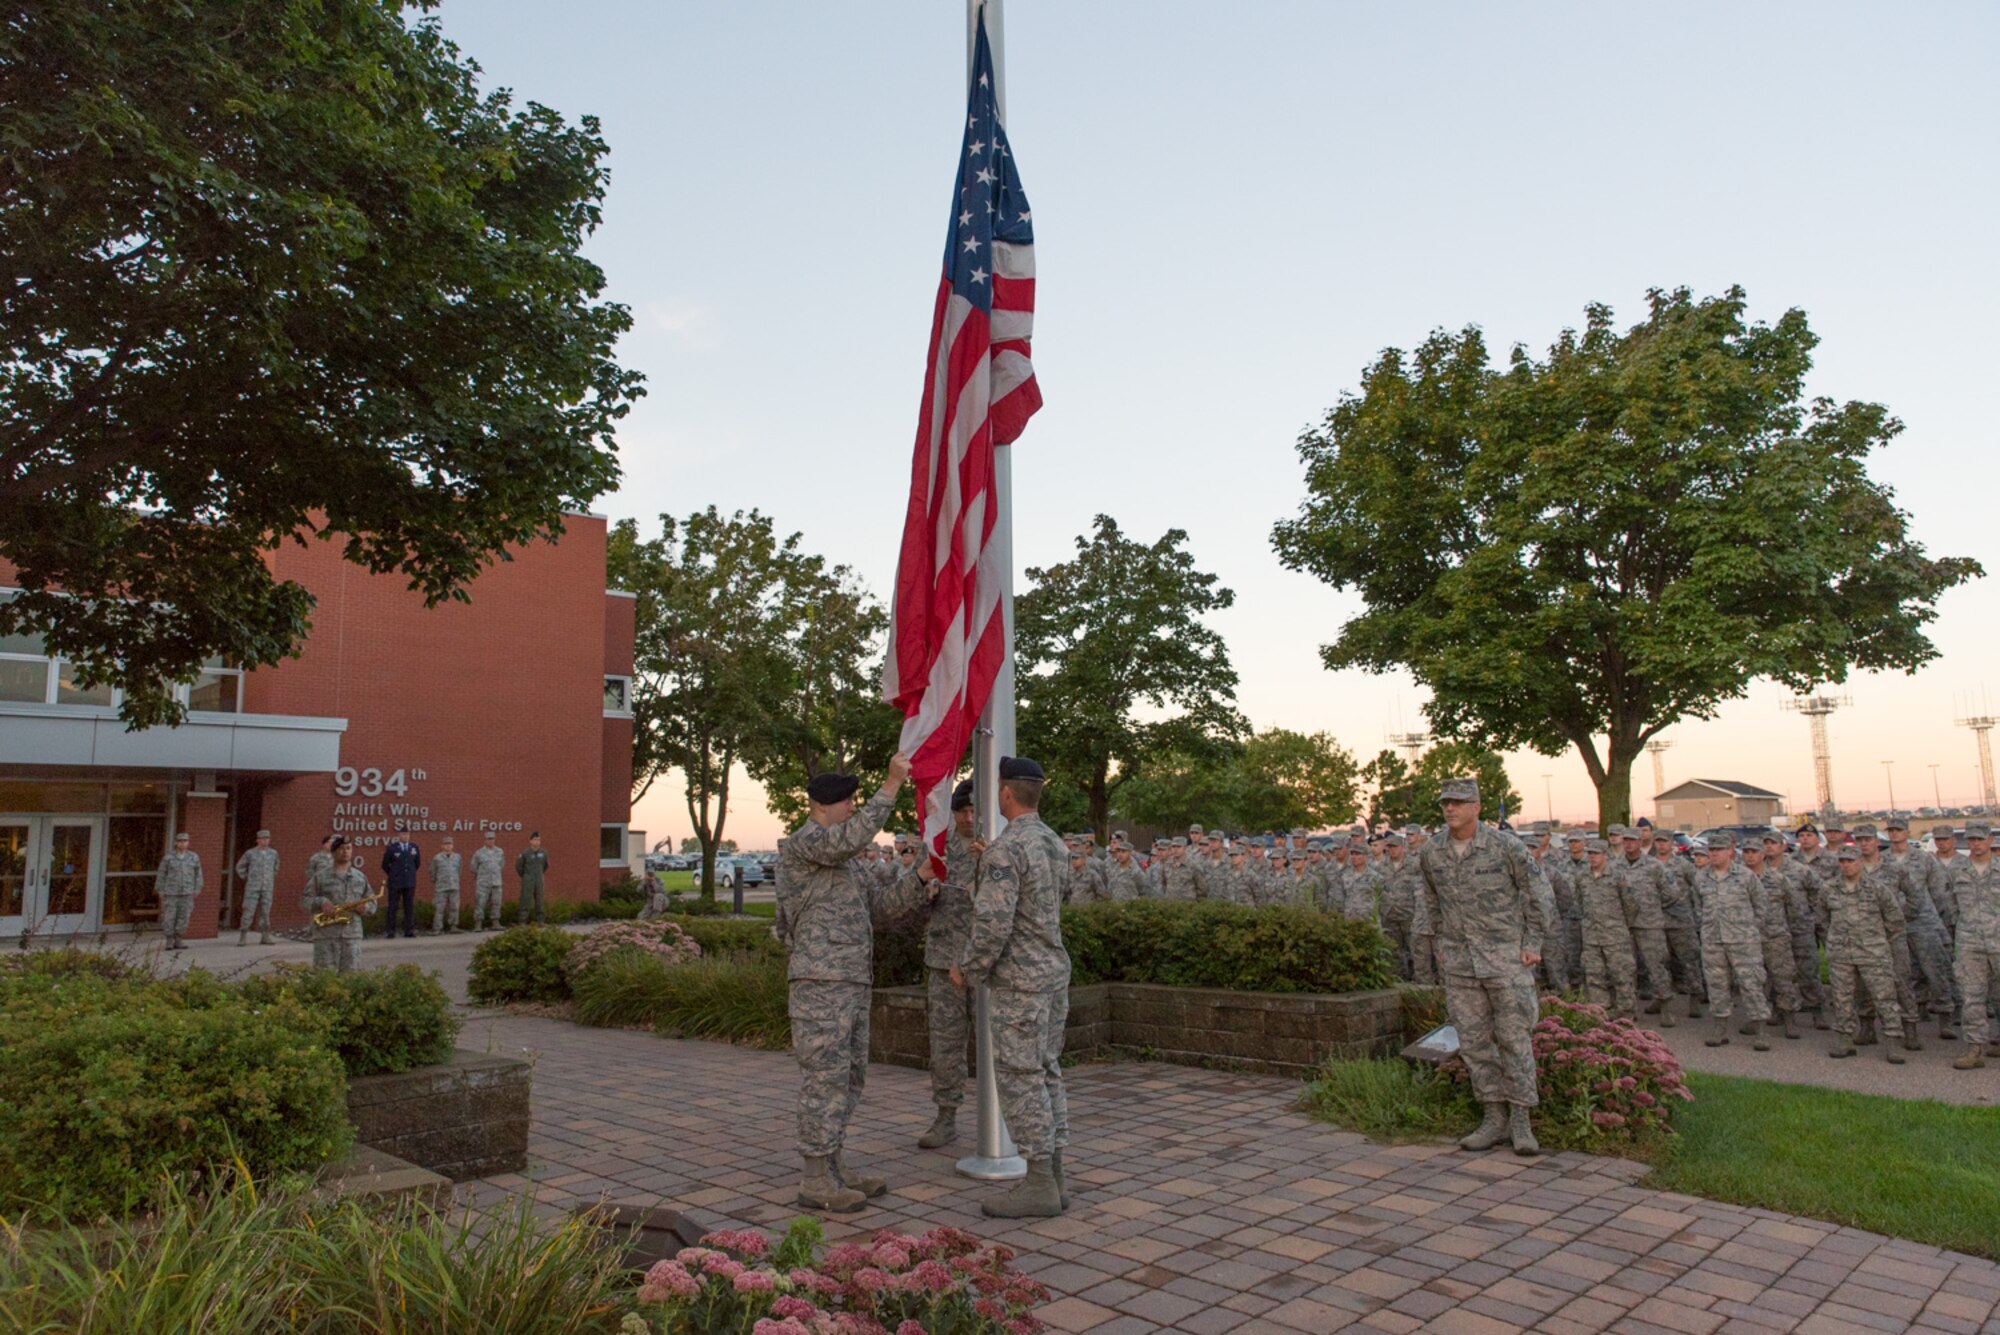 934 Airlift Wing members remembered the fallen and honored the heroic efforts of the rescue and recovery workers who responded after the coordinated terrorist attacks on the morning of September 11, 2001. 